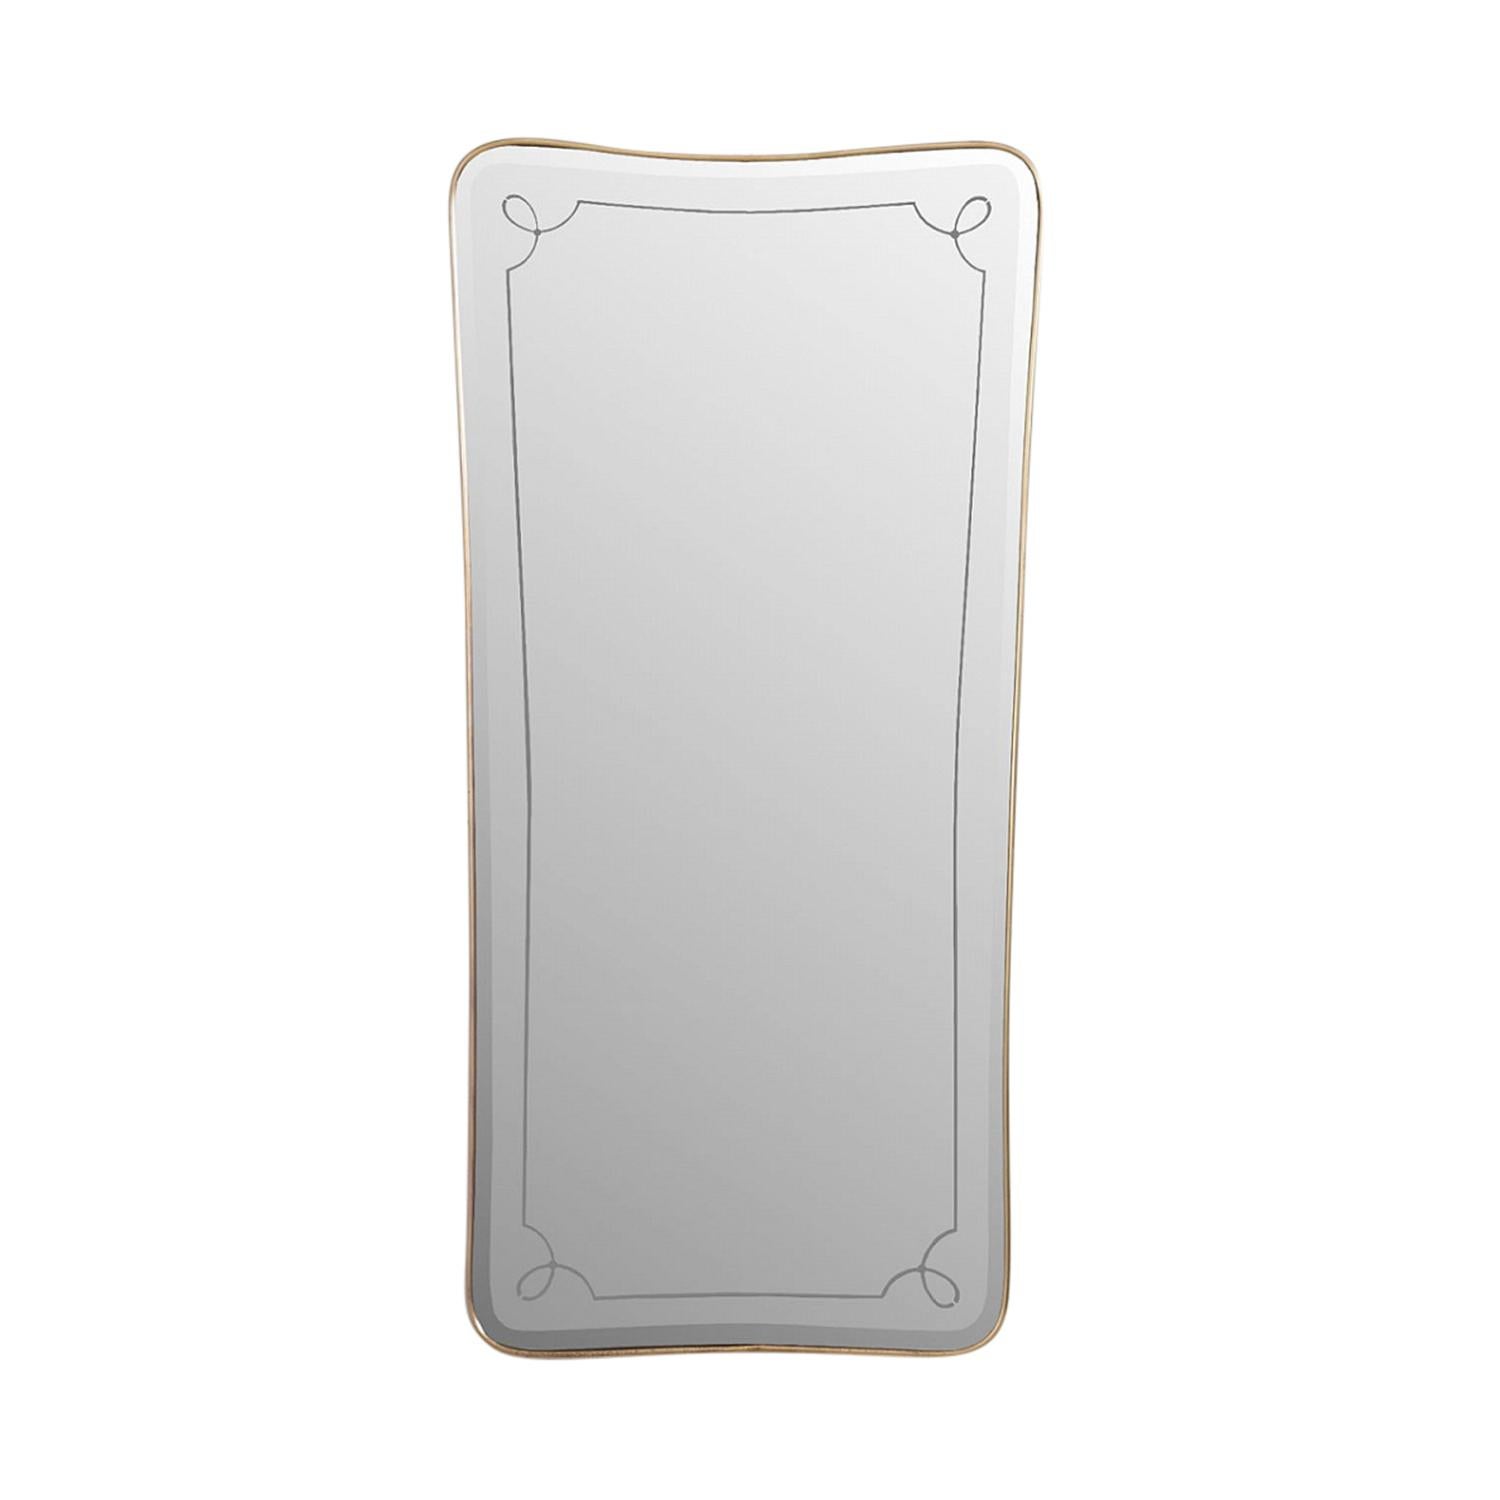 A gold, late vintage Art Deco French asymmetrical wall mirror made of handcrafted polished brass with its original mirrored glass, in good condition. The Parisian wall décor mirror is particularized with soft ornamental lines. Wear consistent with